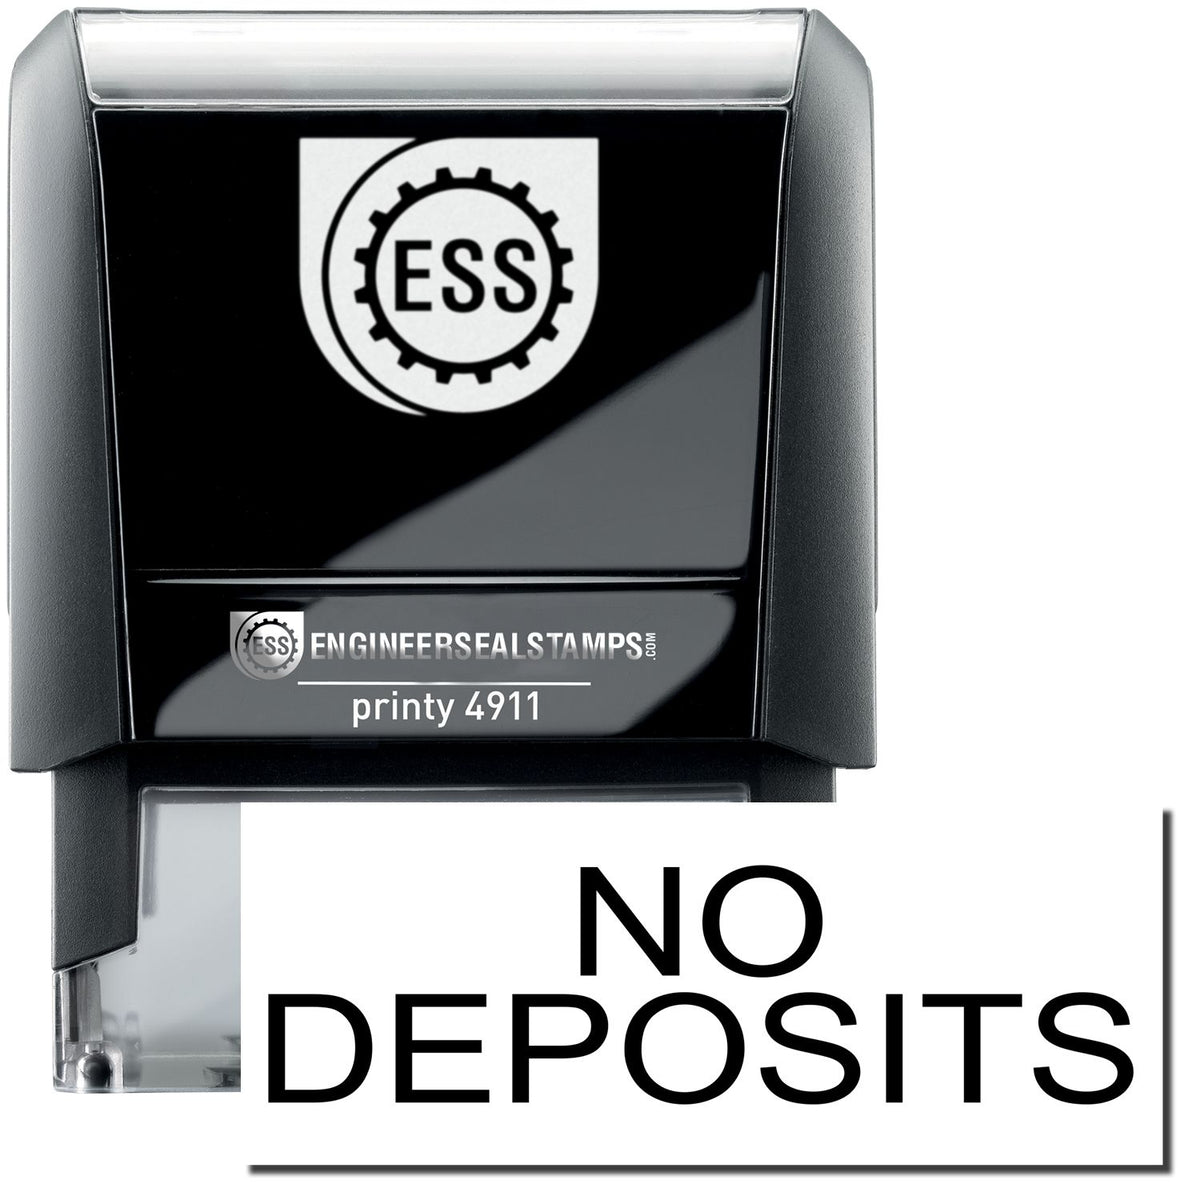 A self-inking stamp with a stamped image showing how the text &quot;NO DEPOSITS&quot; is displayed after stamping.